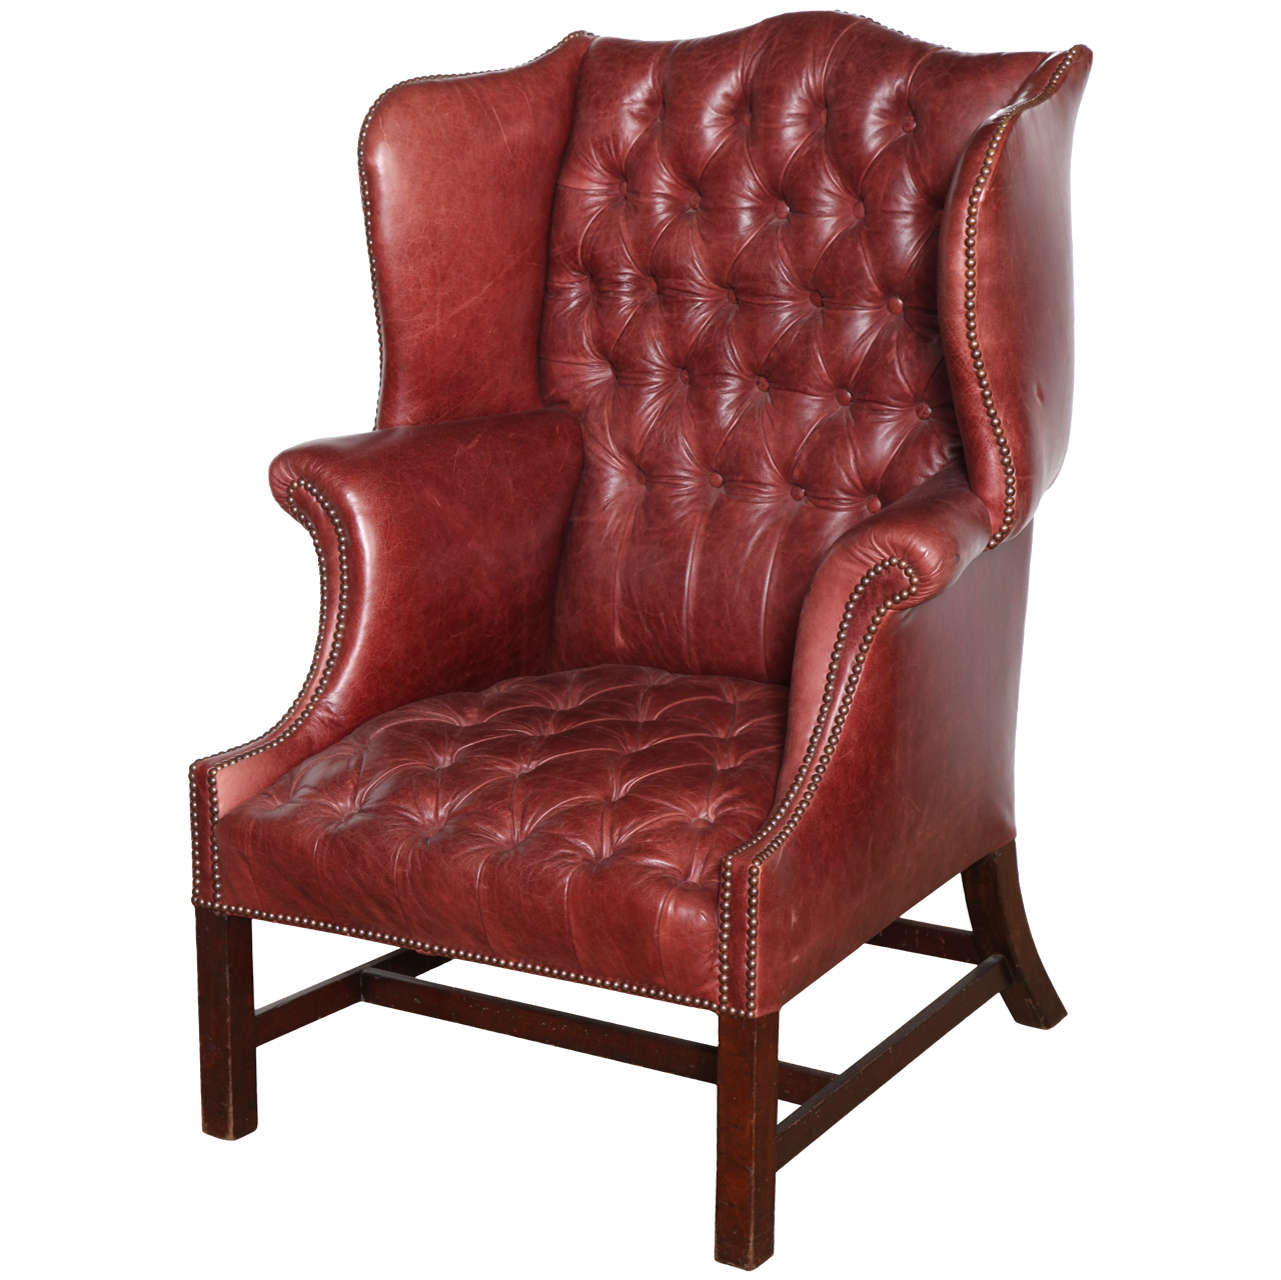 19th Century English, Mahogany and Tufted Leather Wing Chair